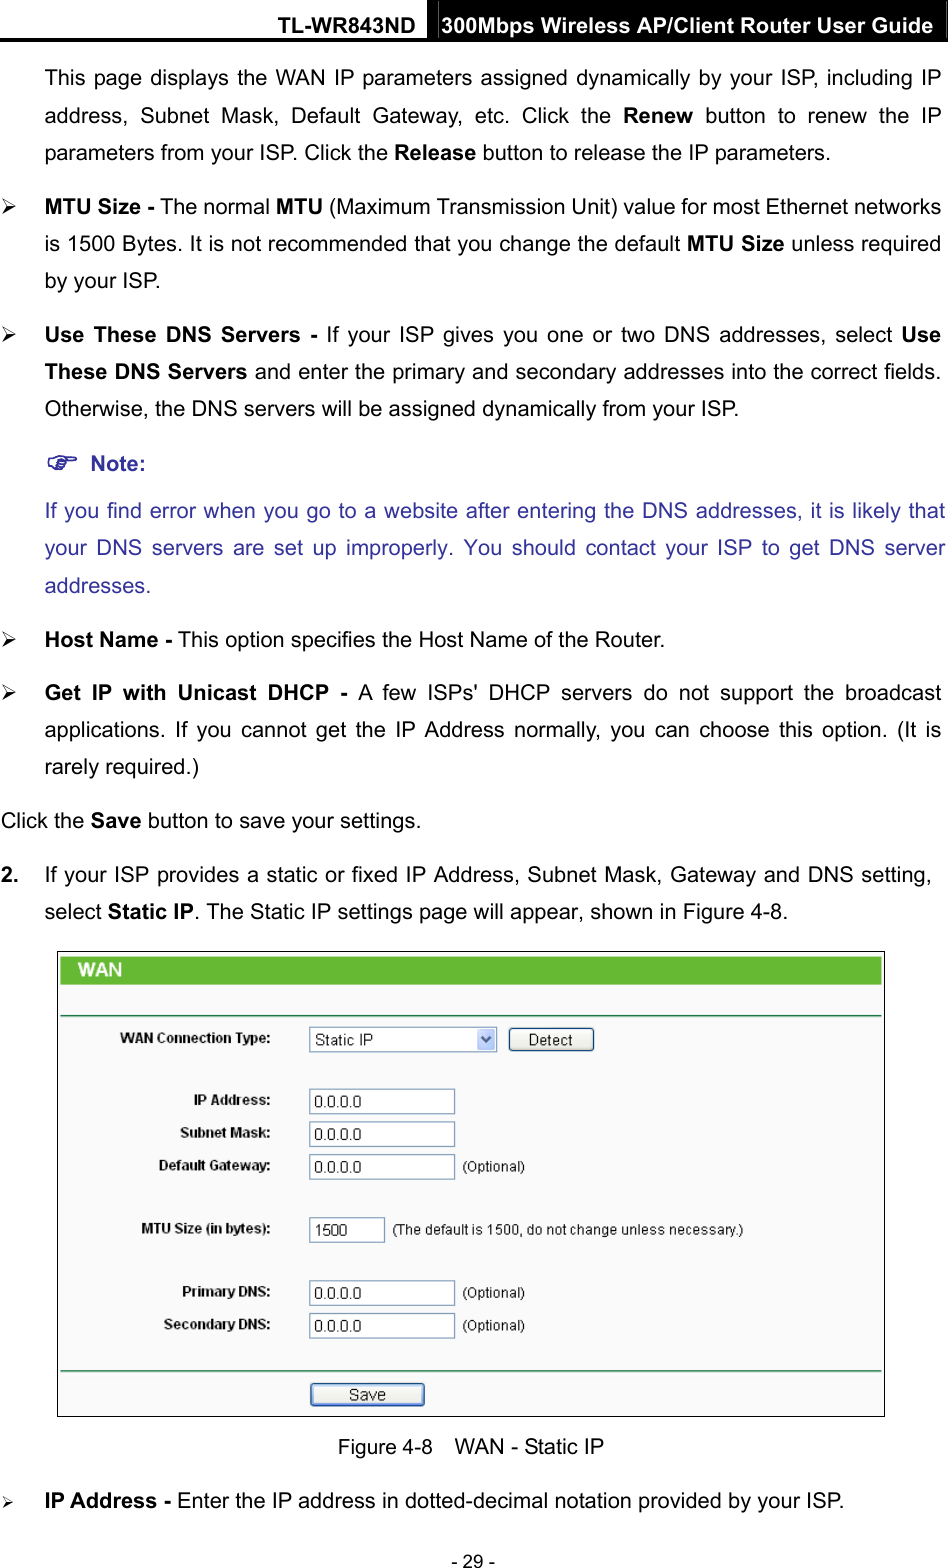 TL-WR843ND 300Mbps Wireless AP/Client Router User Guide - 29 - This page displays the WAN IP parameters assigned dynamically by your ISP, including IP address, Subnet Mask, Default Gateway, etc. Click the Renew button to renew the IP parameters from your ISP. Click the Release button to release the IP parameters.  MTU Size - The normal MTU (Maximum Transmission Unit) value for most Ethernet networks is 1500 Bytes. It is not recommended that you change the default MTU Size unless required by your ISP.    Use These DNS Servers - If your ISP gives you one or two DNS addresses, select Use These DNS Servers and enter the primary and secondary addresses into the correct fields. Otherwise, the DNS servers will be assigned dynamically from your ISP.    Note: If you find error when you go to a website after entering the DNS addresses, it is likely that your DNS servers are set up improperly. You should contact your ISP to get DNS server addresses.   Host Name - This option specifies the Host Name of the Router.  Get IP with Unicast DHCP - A few ISPs&apos; DHCP servers do not support the broadcast applications. If you cannot get the IP Address normally, you can choose this option. (It is rarely required.) Click the Save button to save your settings. 2.  If your ISP provides a static or fixed IP Address, Subnet Mask, Gateway and DNS setting, select Static IP. The Static IP settings page will appear, shown in Figure 4-8.  Figure 4-8    WAN - Static IP  IP Address - Enter the IP address in dotted-decimal notation provided by your ISP. 